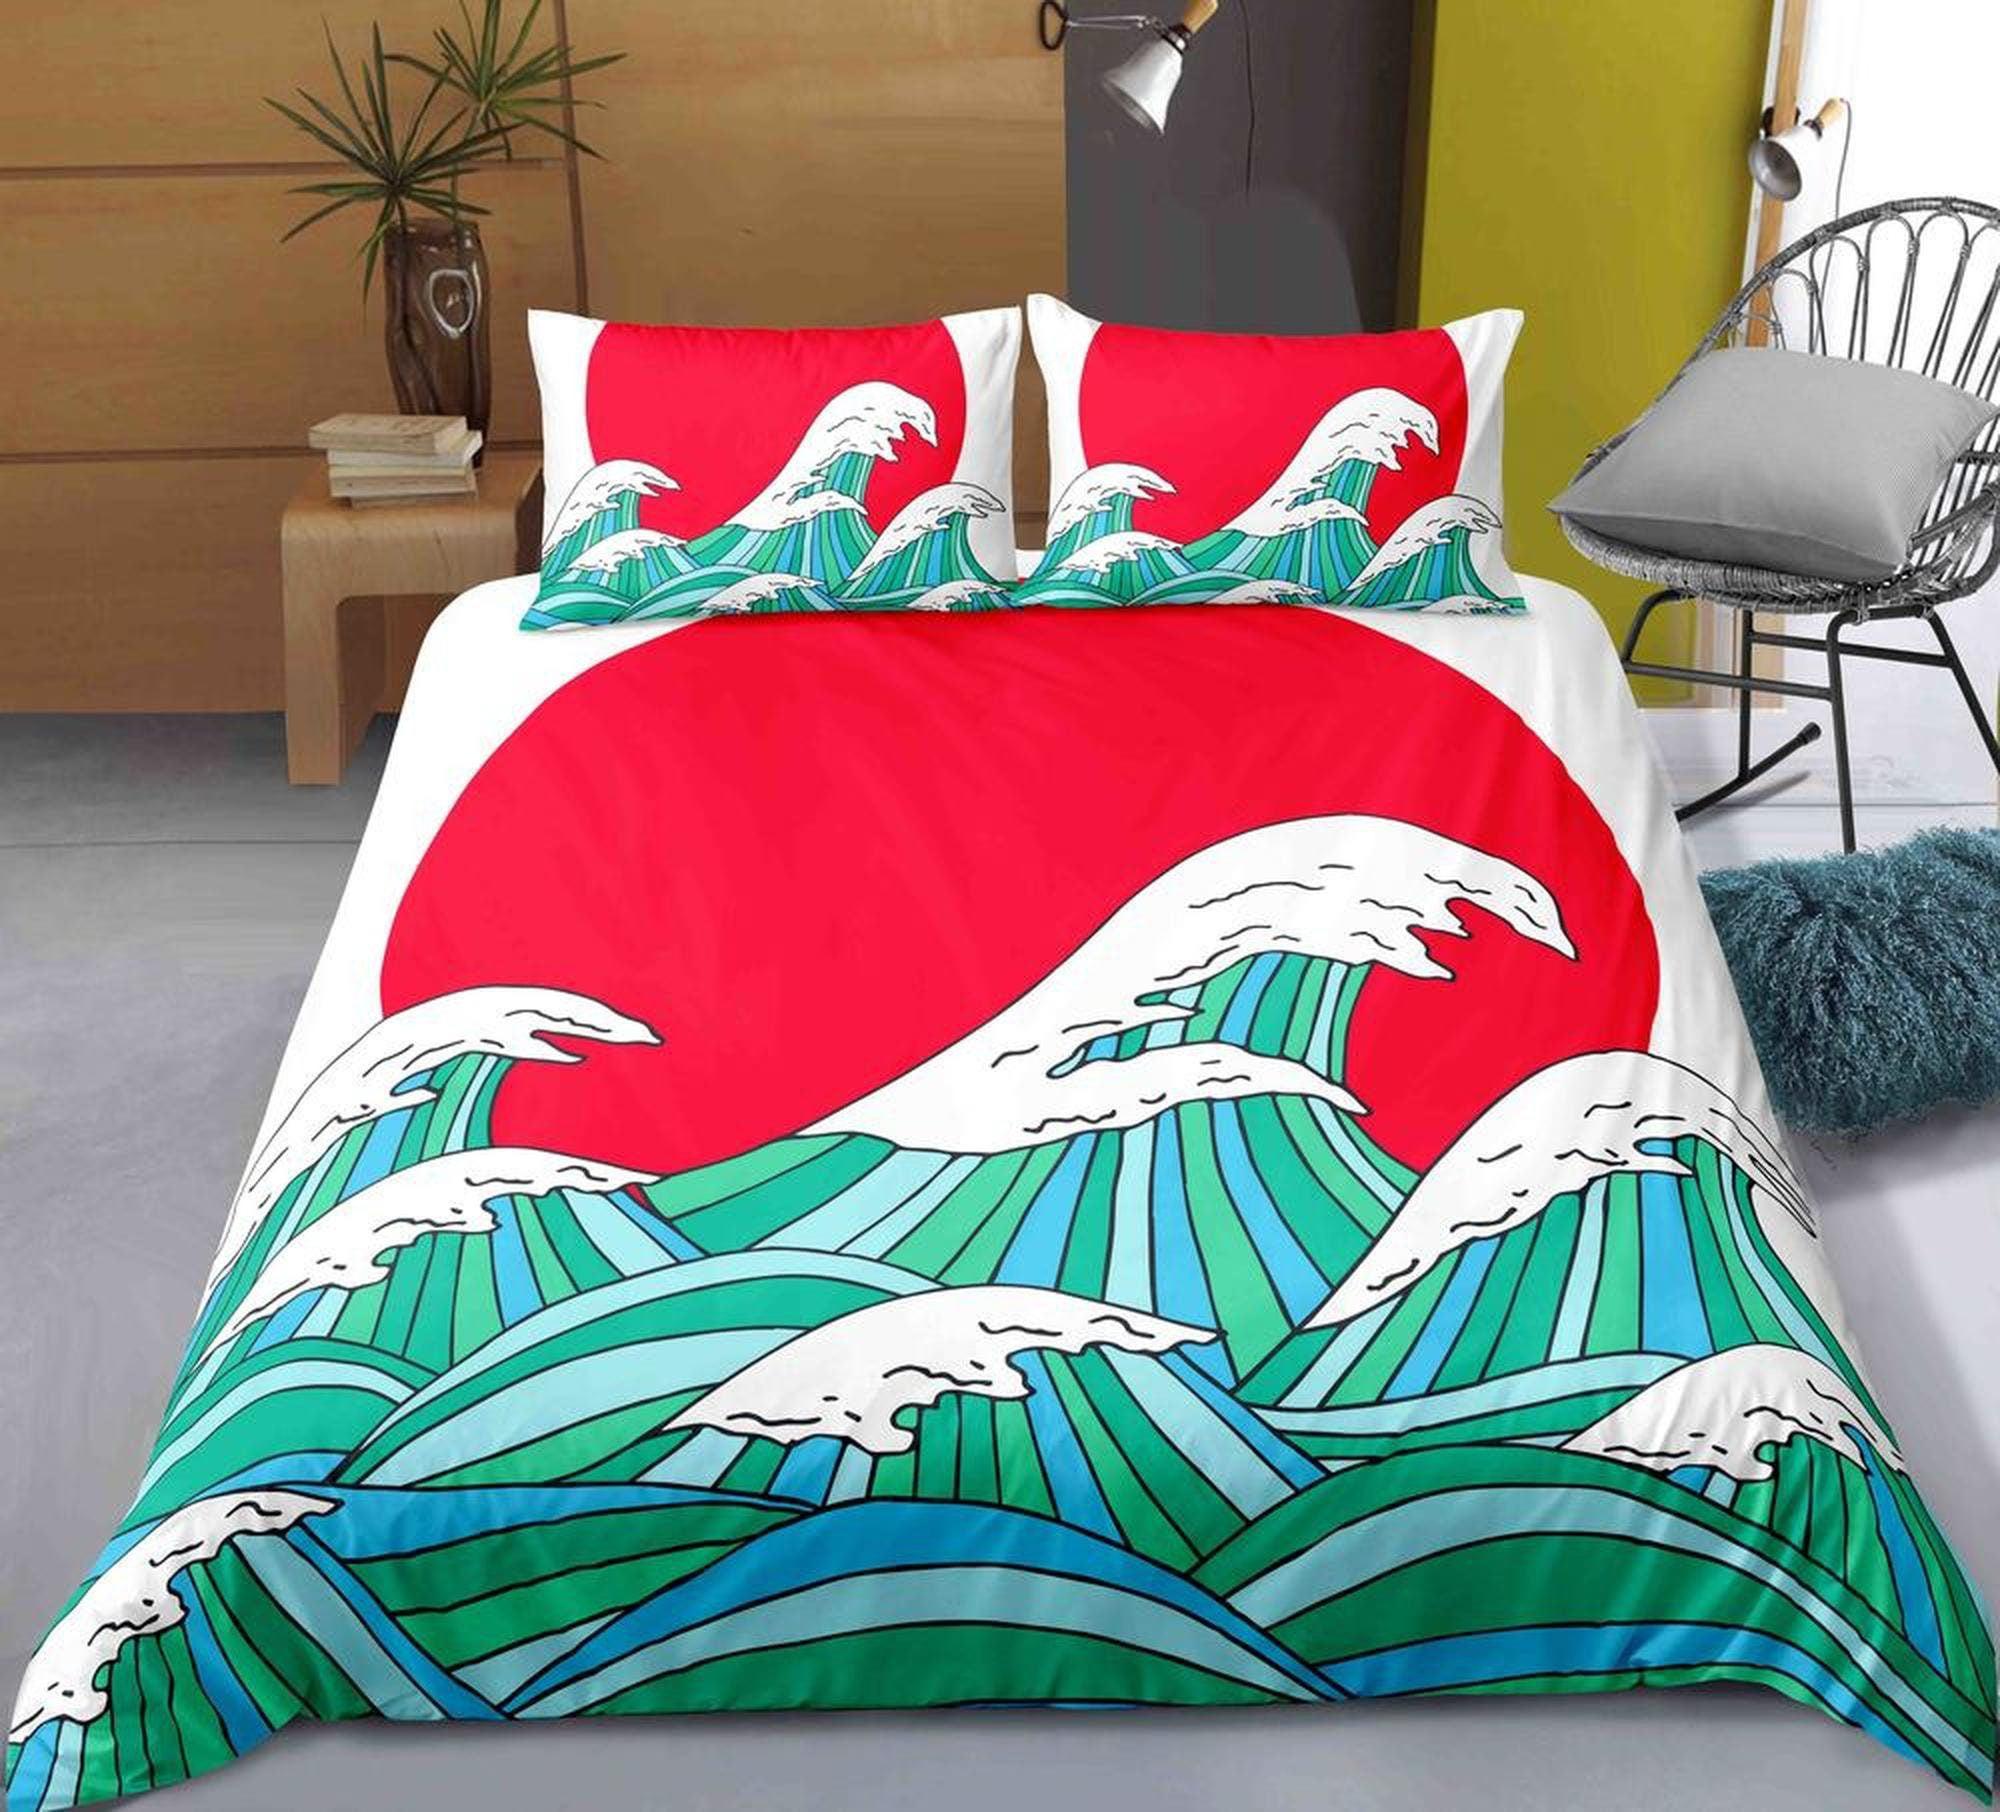 daintyduvet Japan art culture oriental bedding, big waves and red sun, japanese duvet cover set for king, queen, full, twin bed, cool zipper bedding